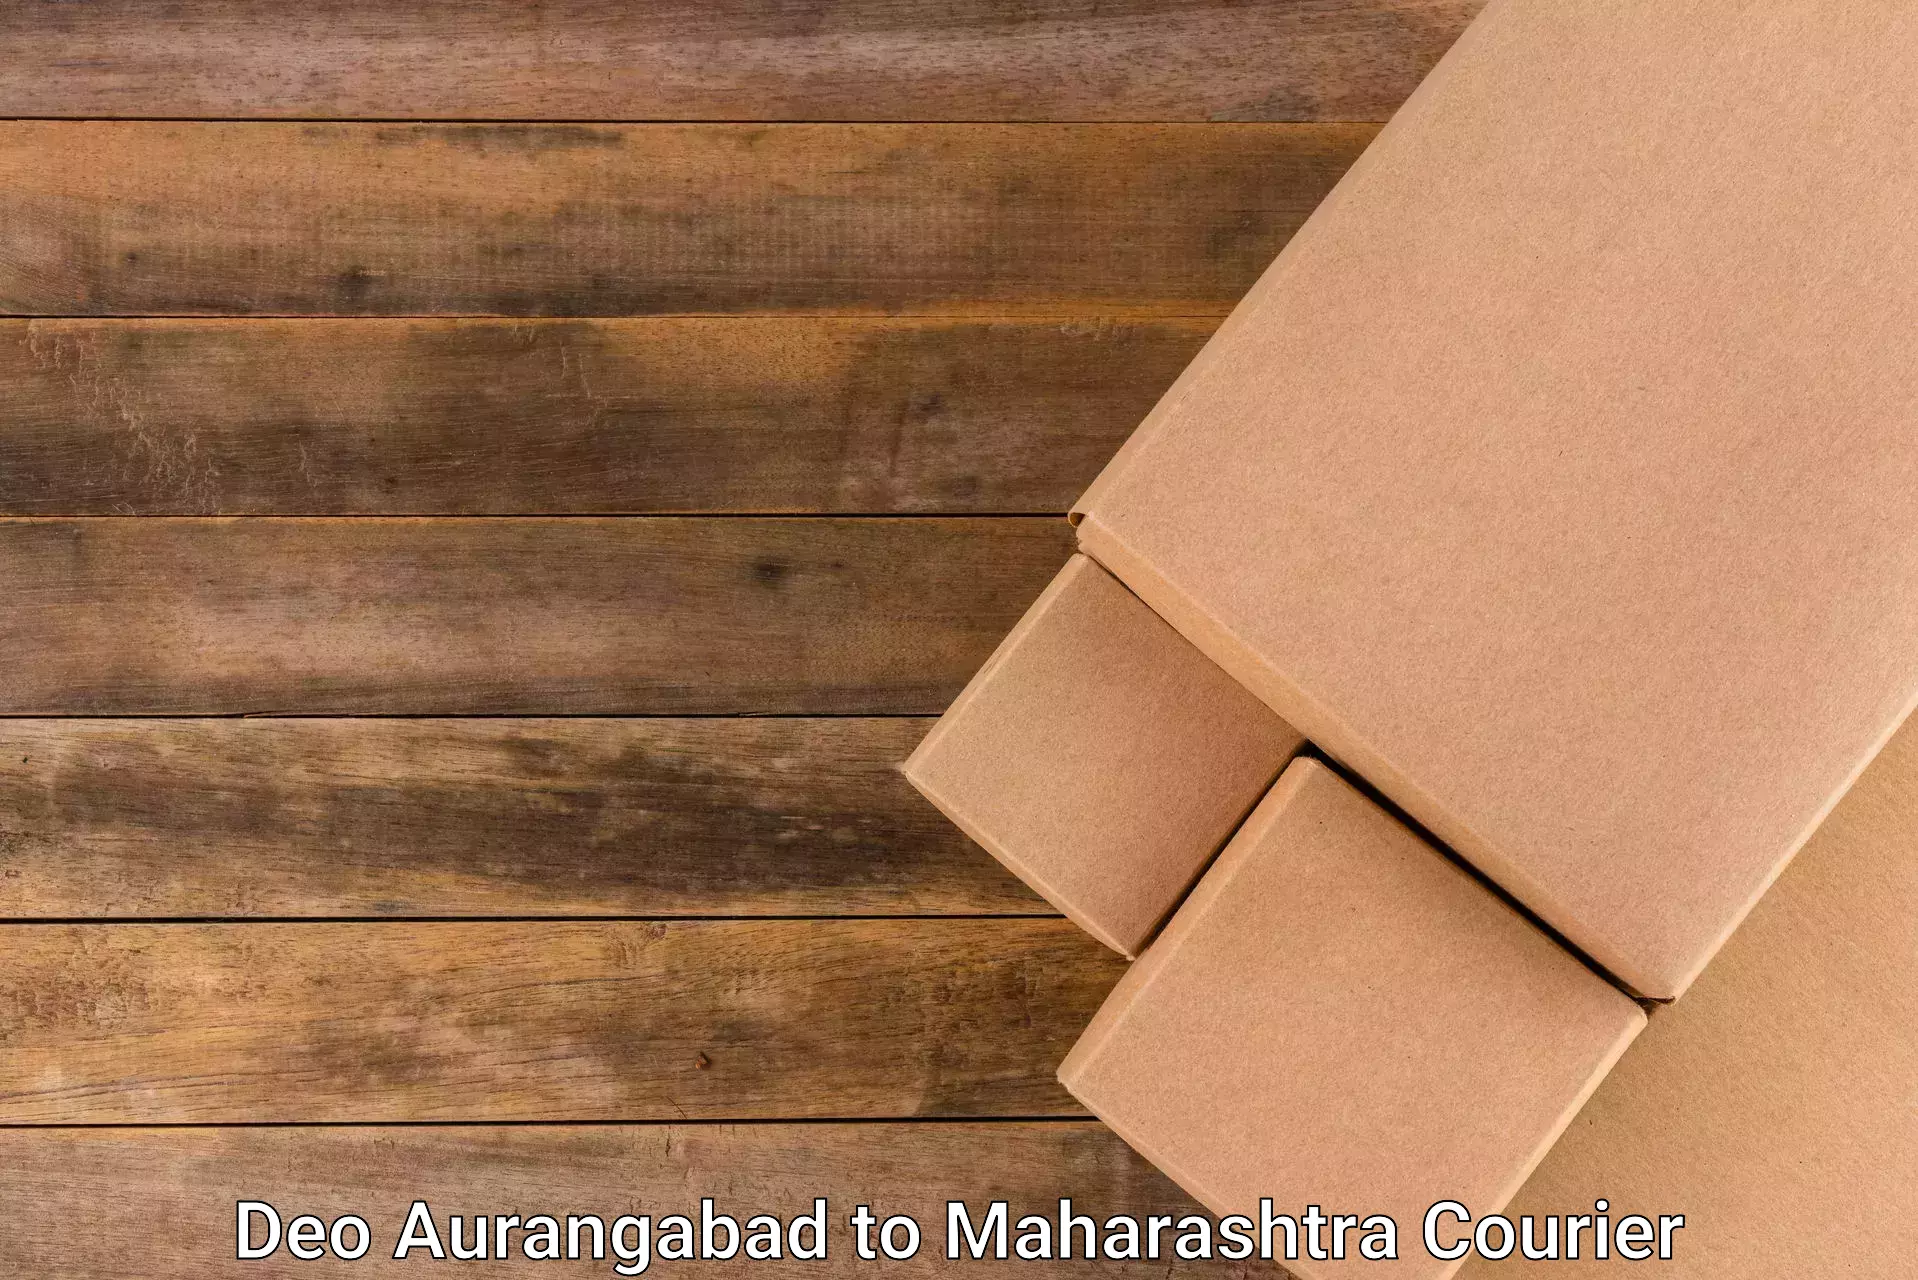 Multi-national courier services Deo Aurangabad to Lonikand